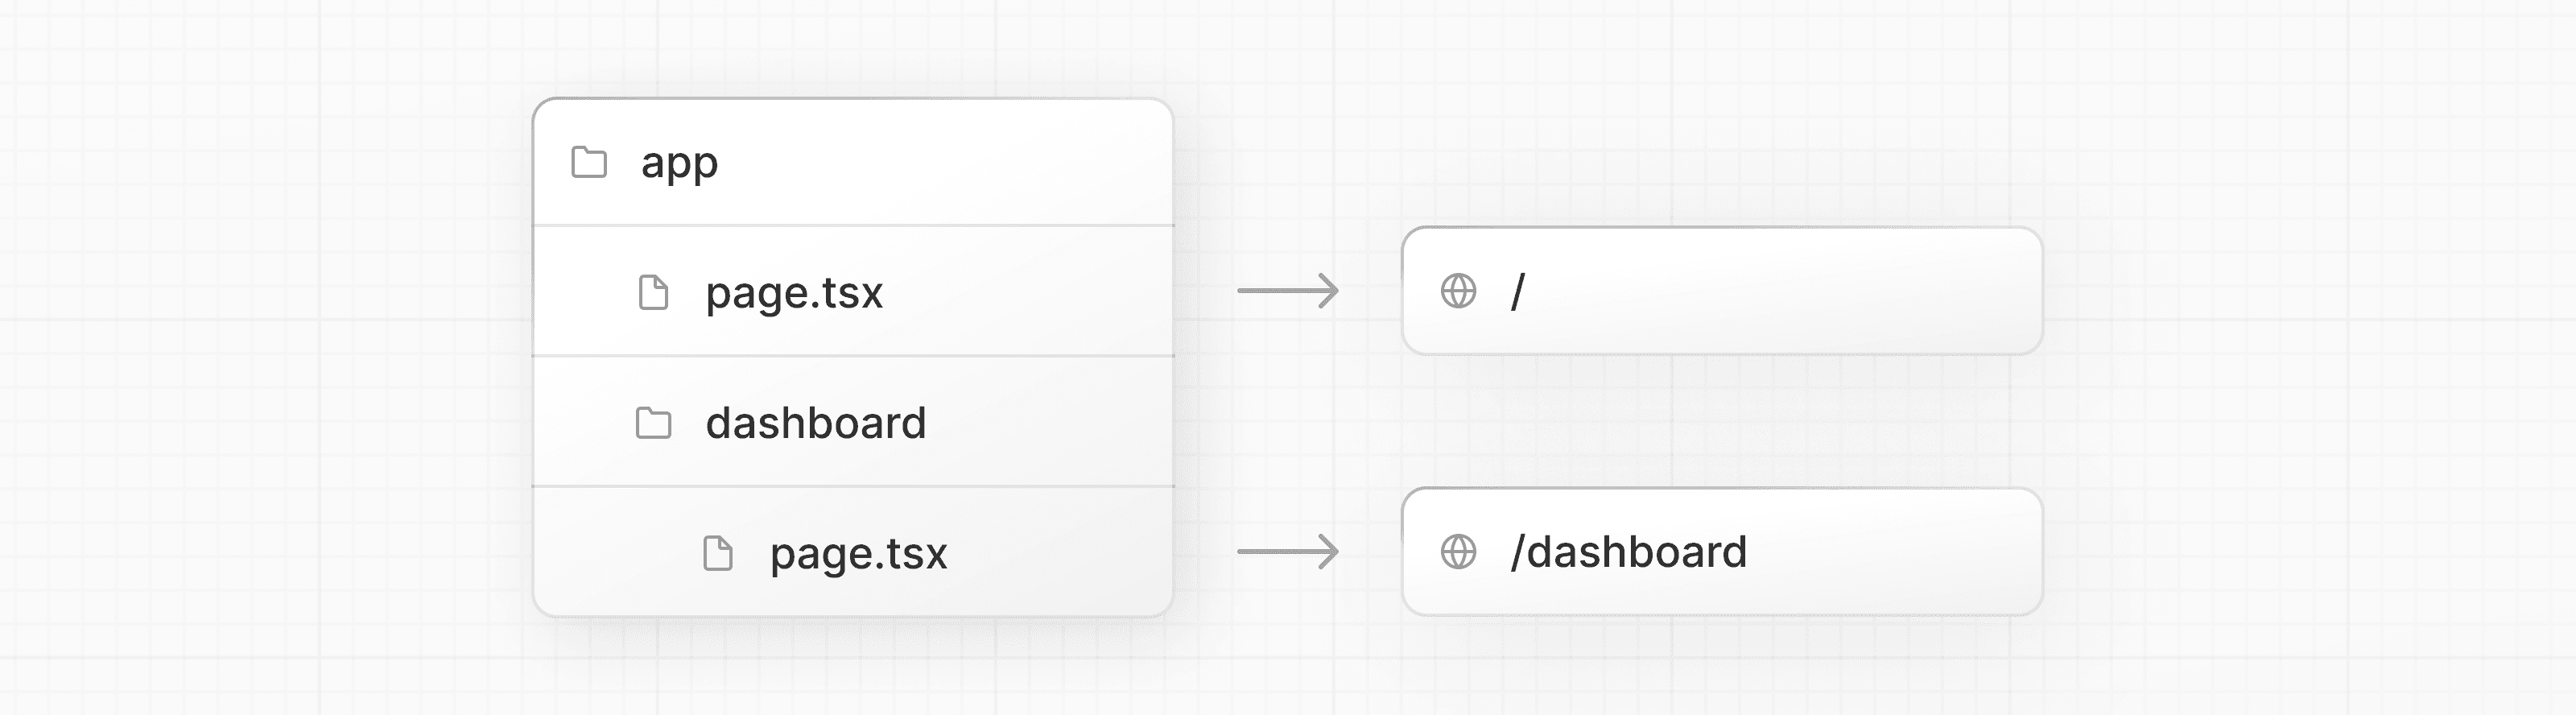 Diagram showing how adding a folder called dashboard creates a new route '/dashboard'